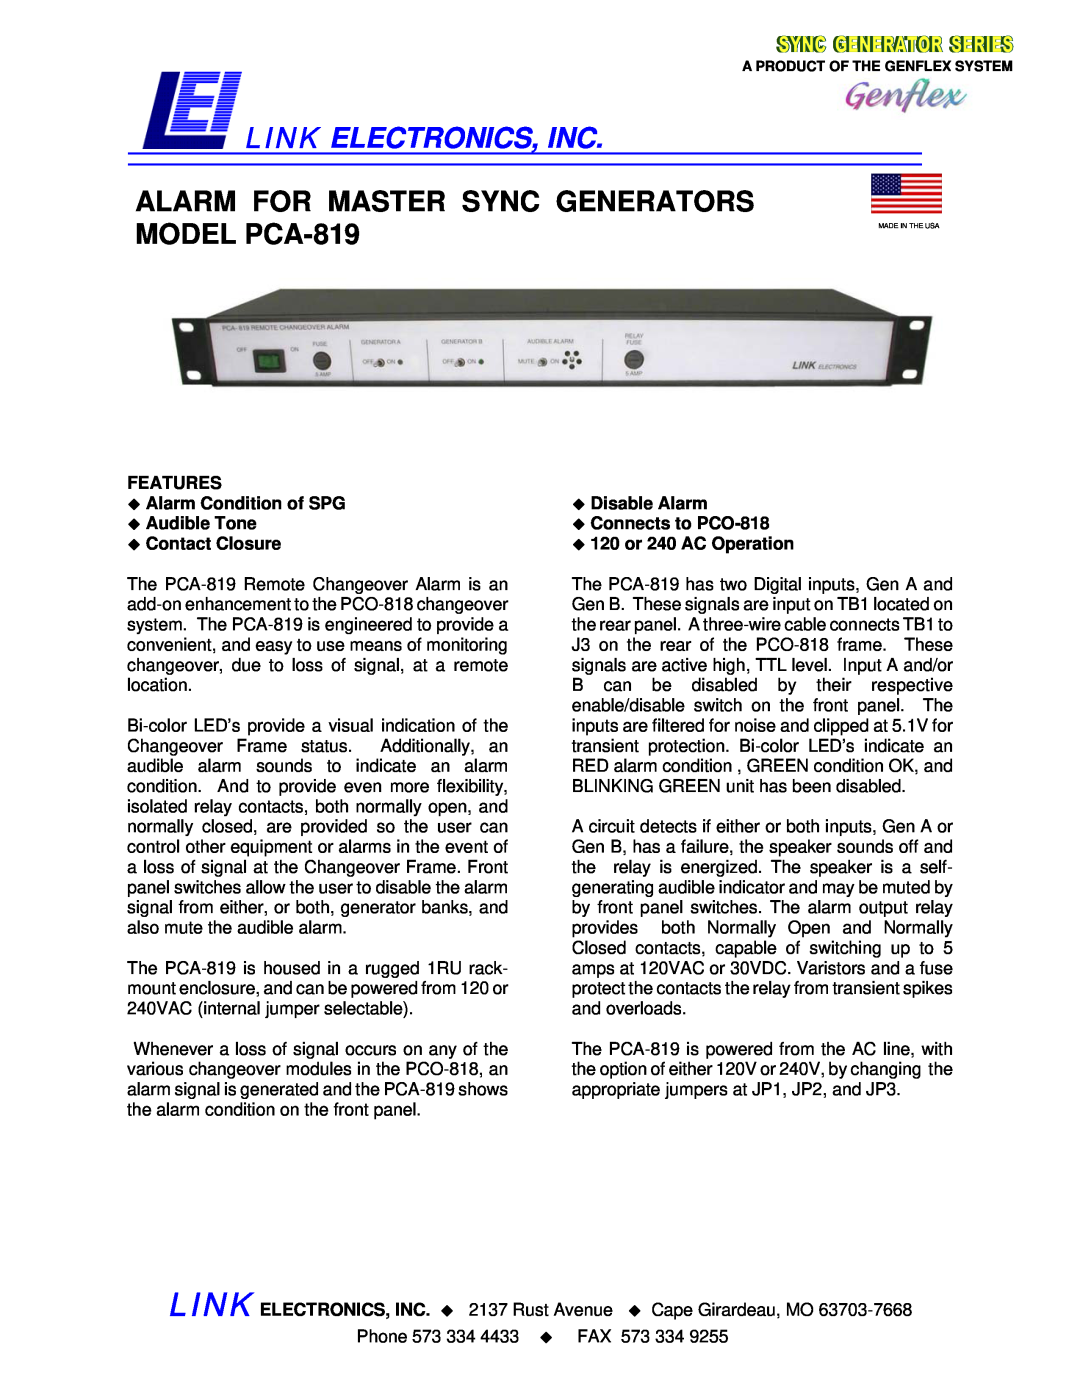 Link electronic PCA-819 manual FEATURES ‹ Alarm Condition of SPG ‹ Audible Tone ‹ Contact Closure, Link Electronics, Inc 